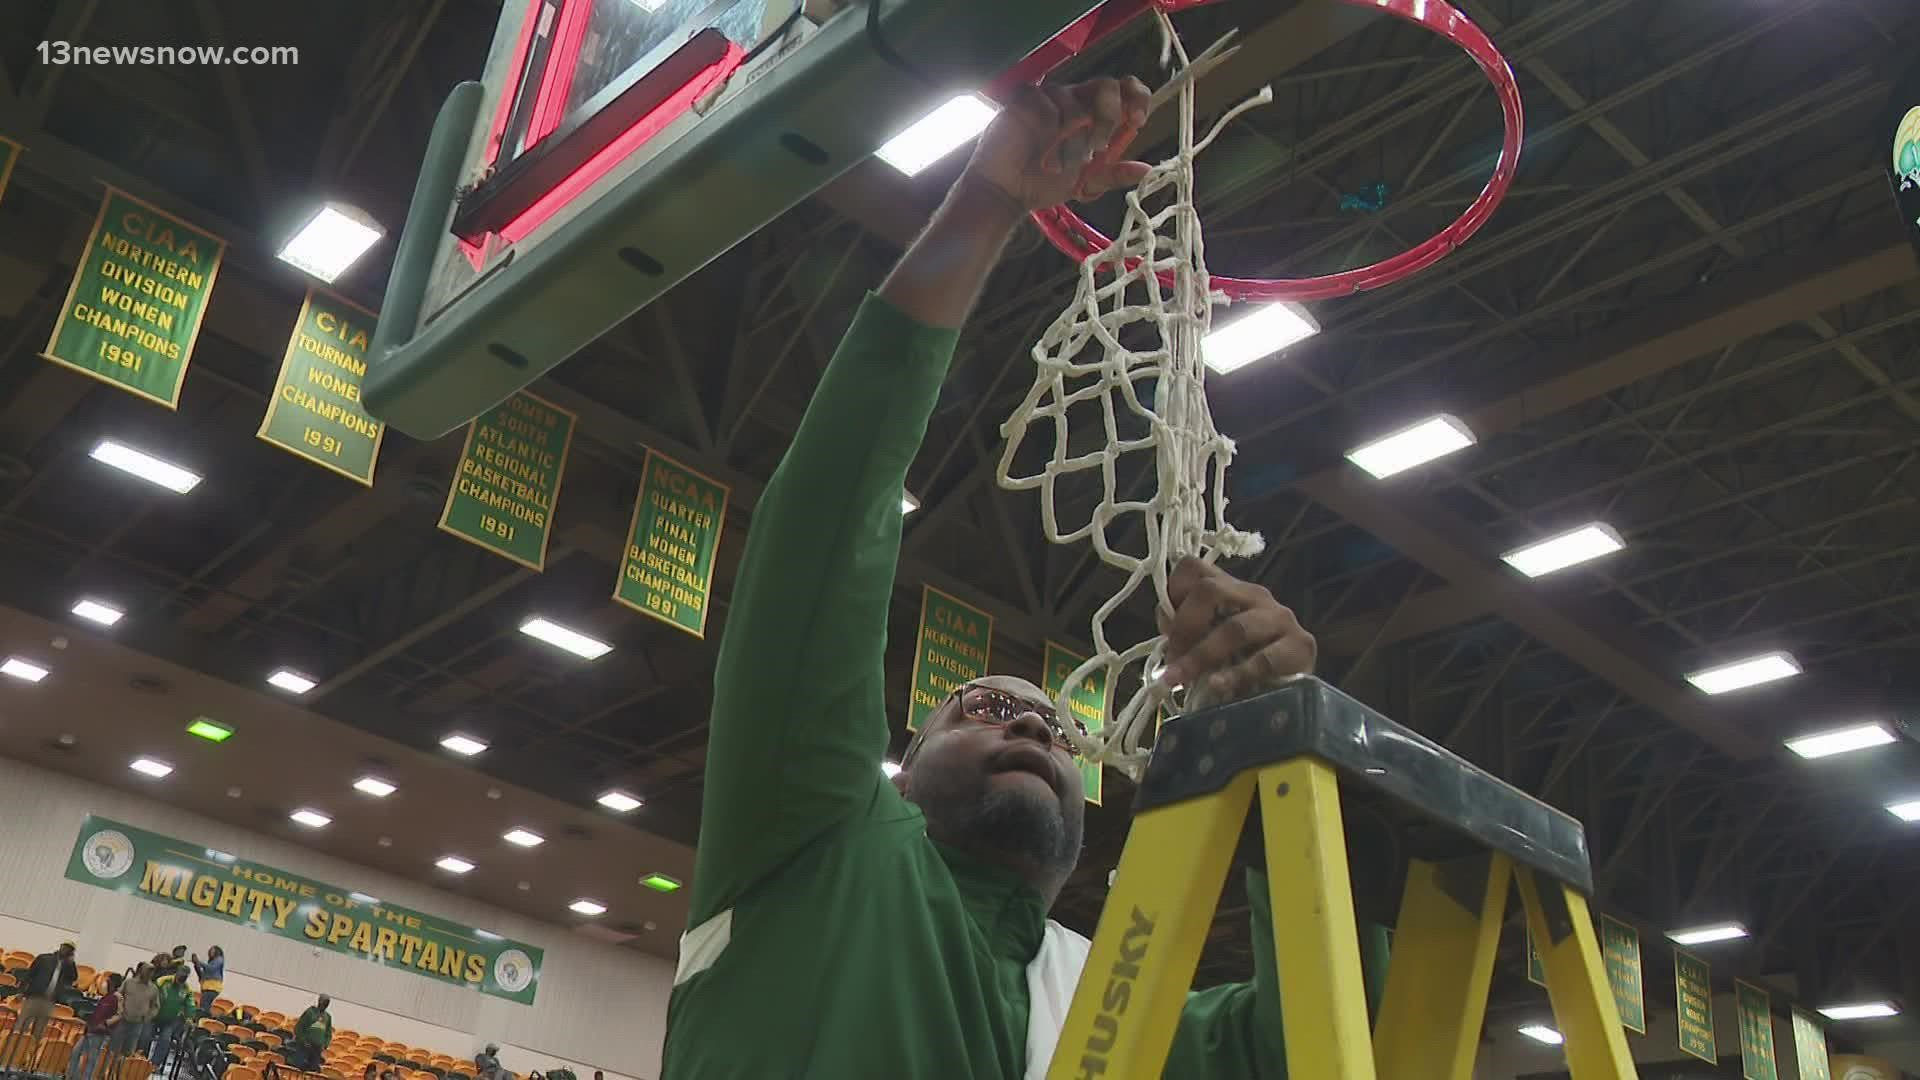 With the win, Norfolk State claims back to back MEAC regular season titles